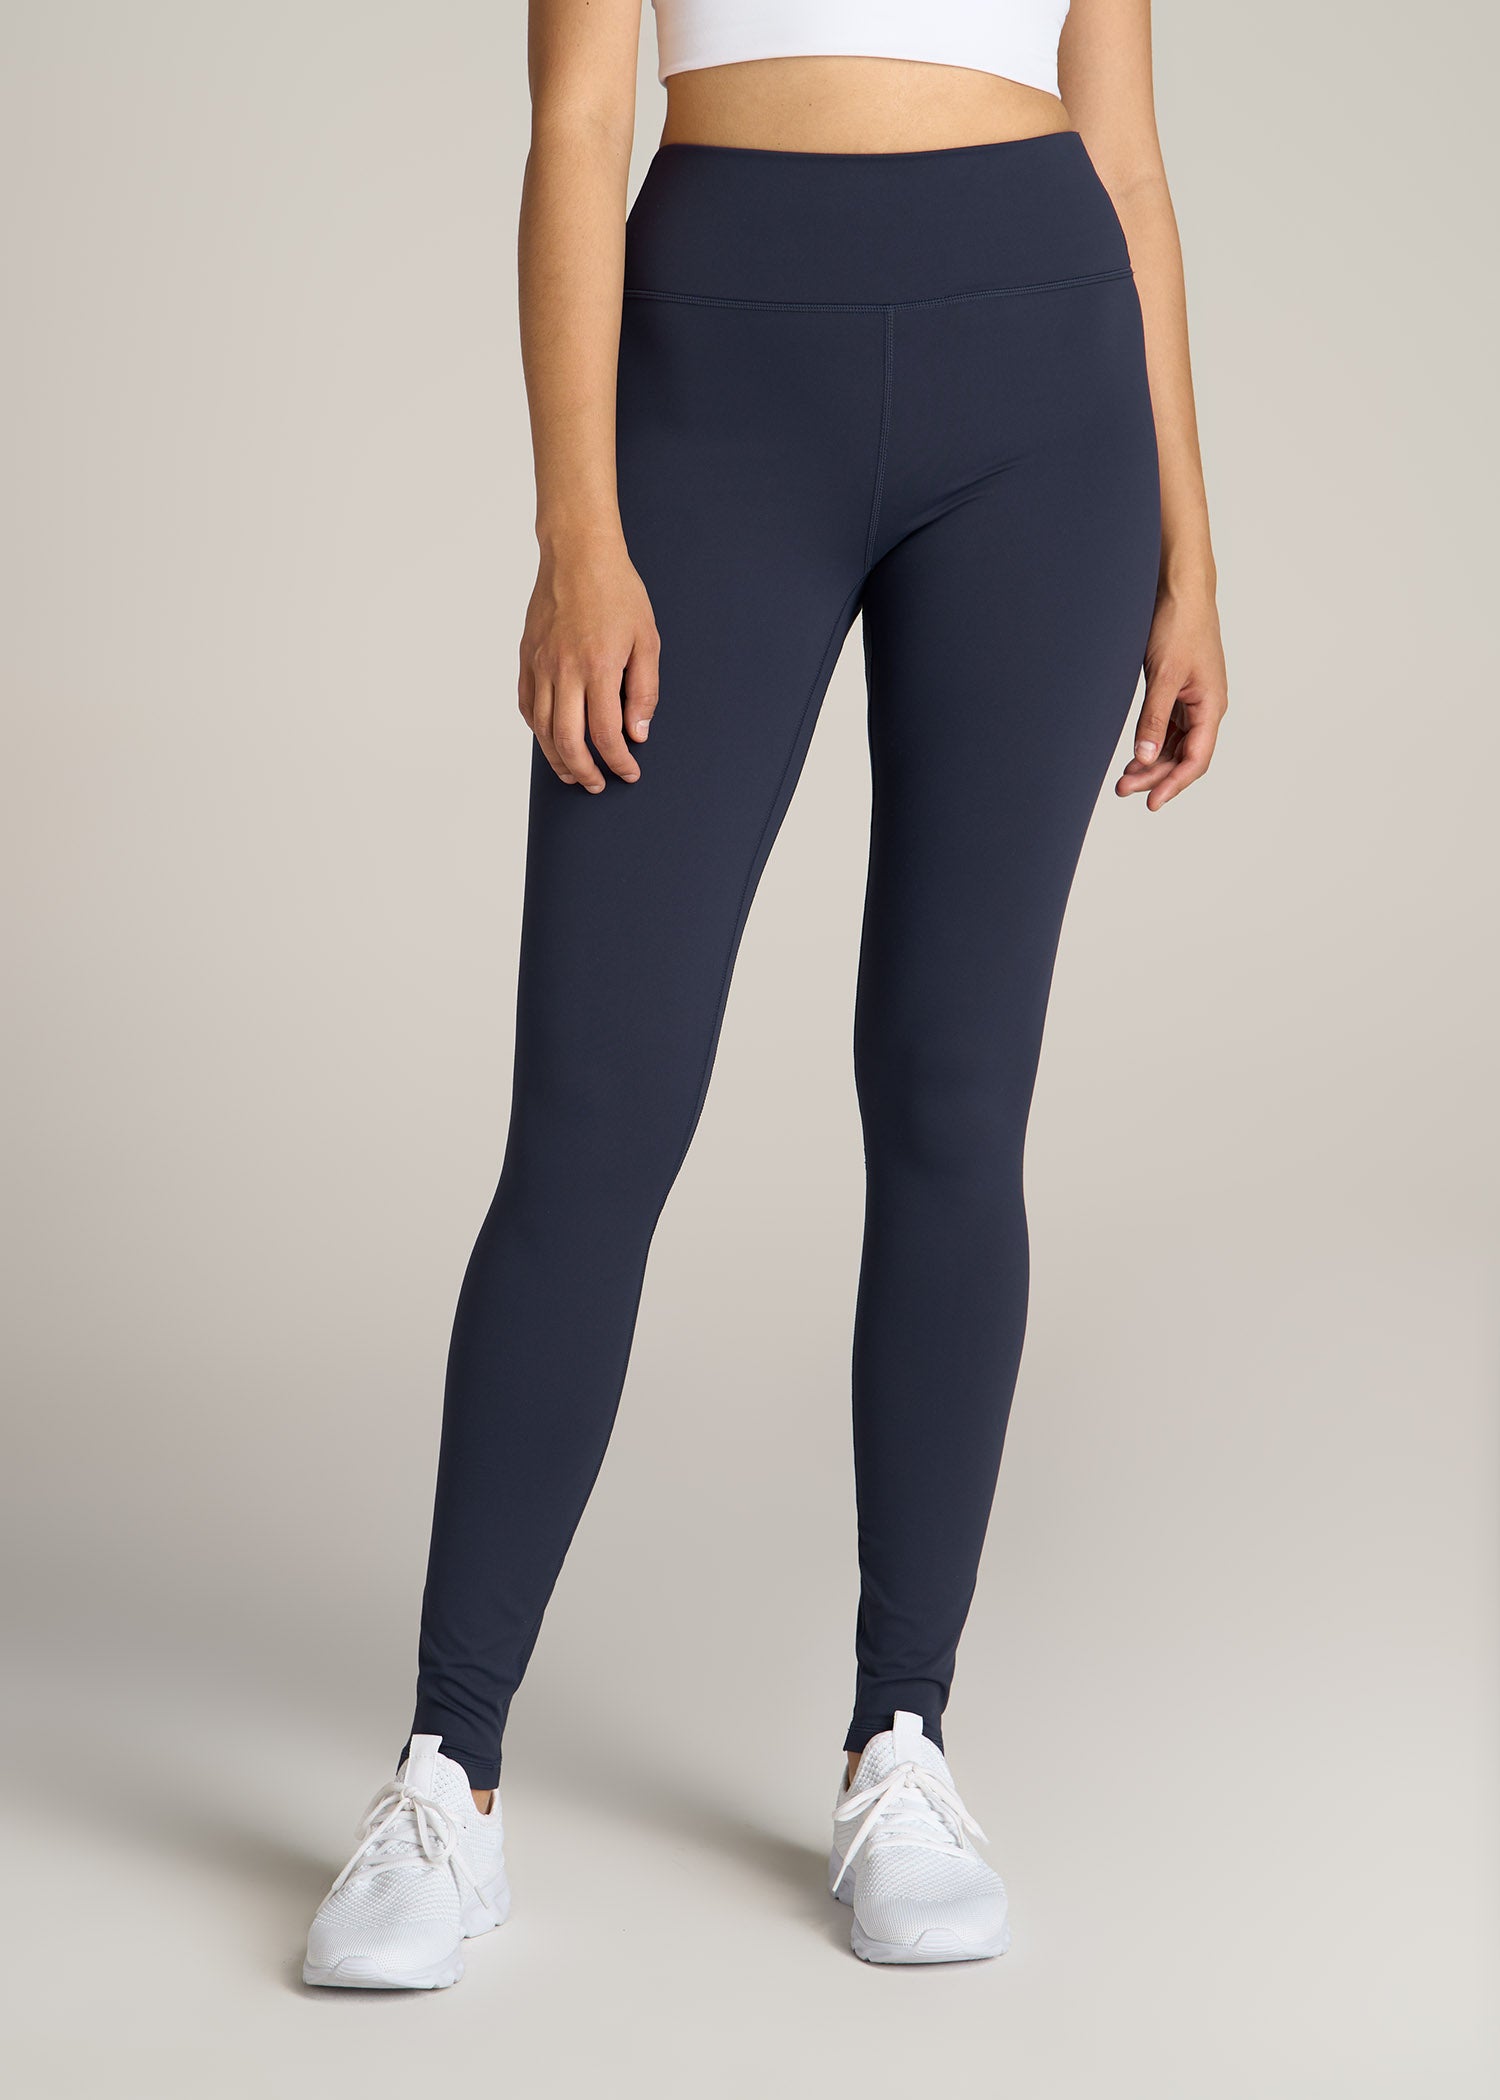 lululemon athletica, Pants & Jumpsuits, Lululemon Mapped Out High Rise  Leggings In Cassis Size 4